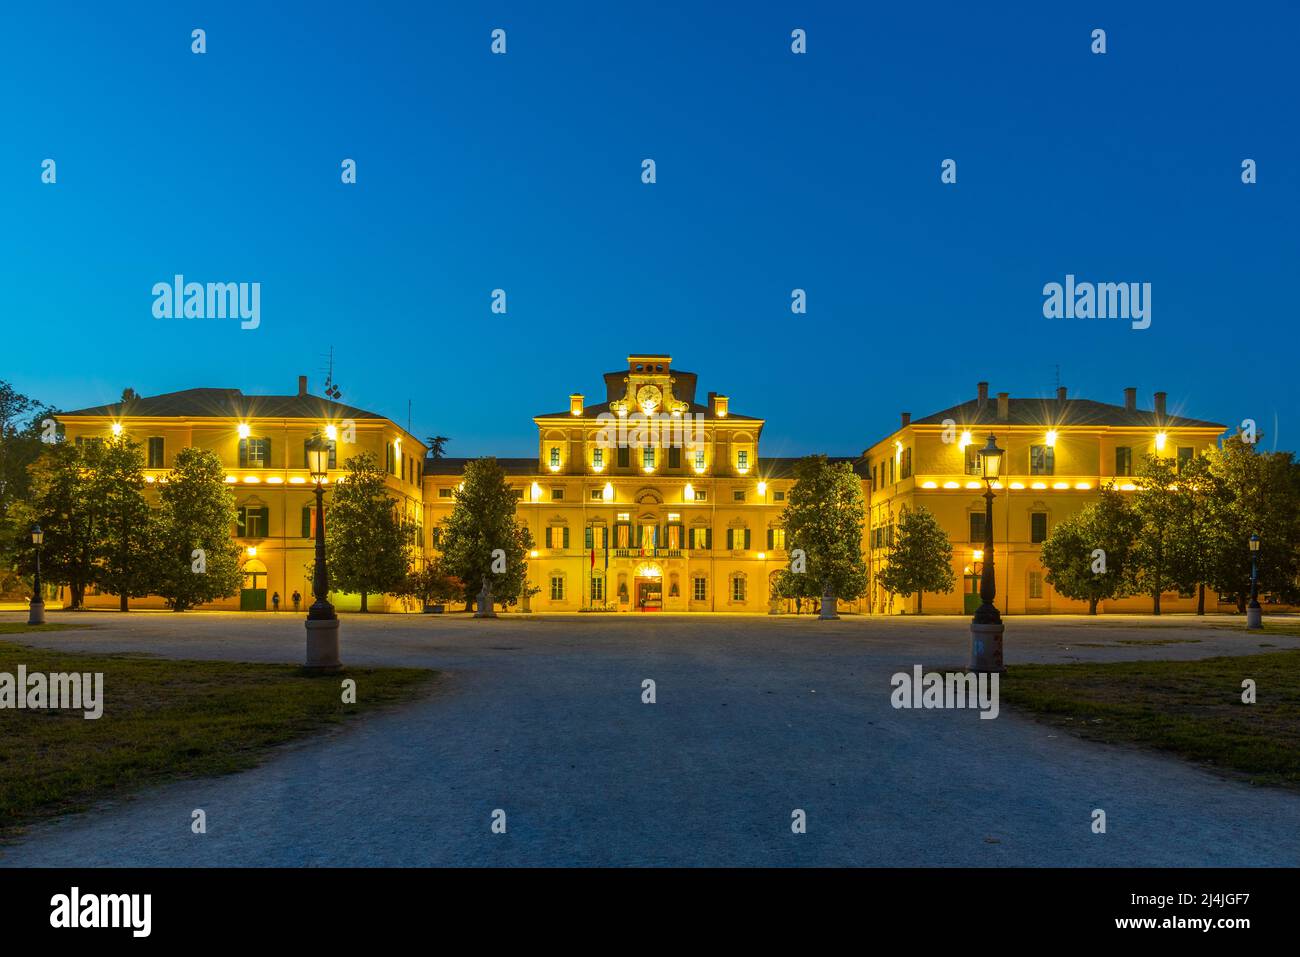 Night view of Palazzo Ducale in Parma, Italy. Stock Photo